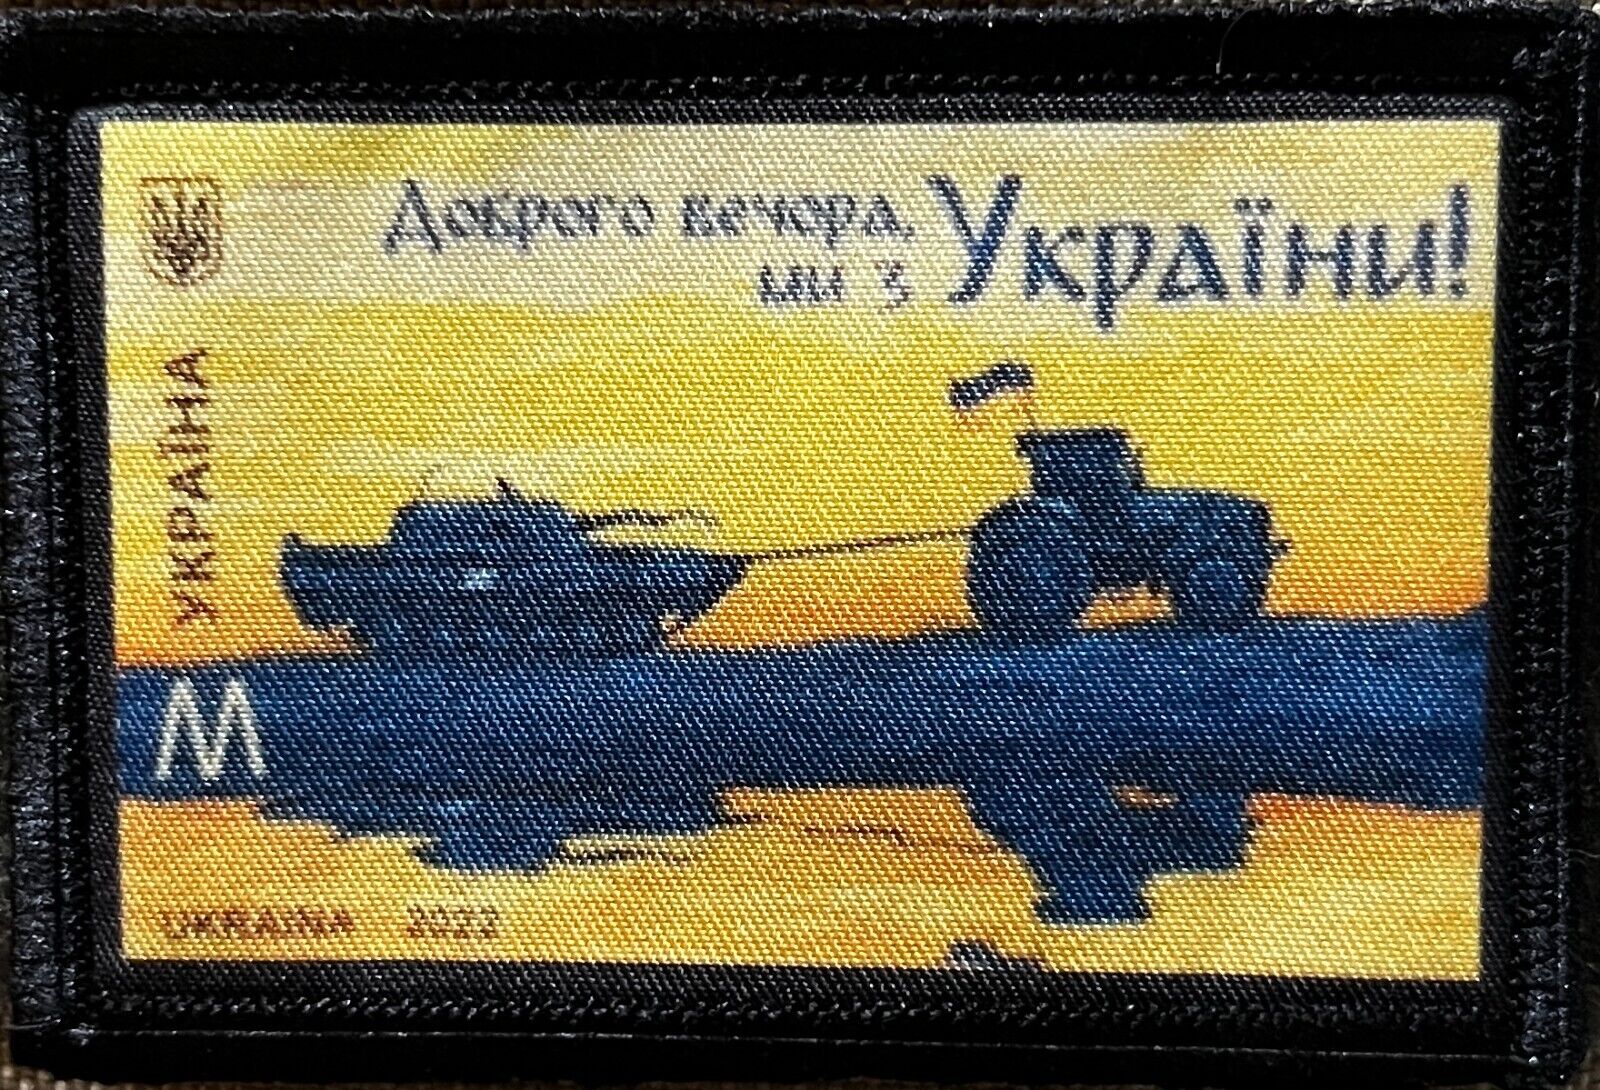 Postage Stamp Ukraine Tractor Morale Patch ARMY